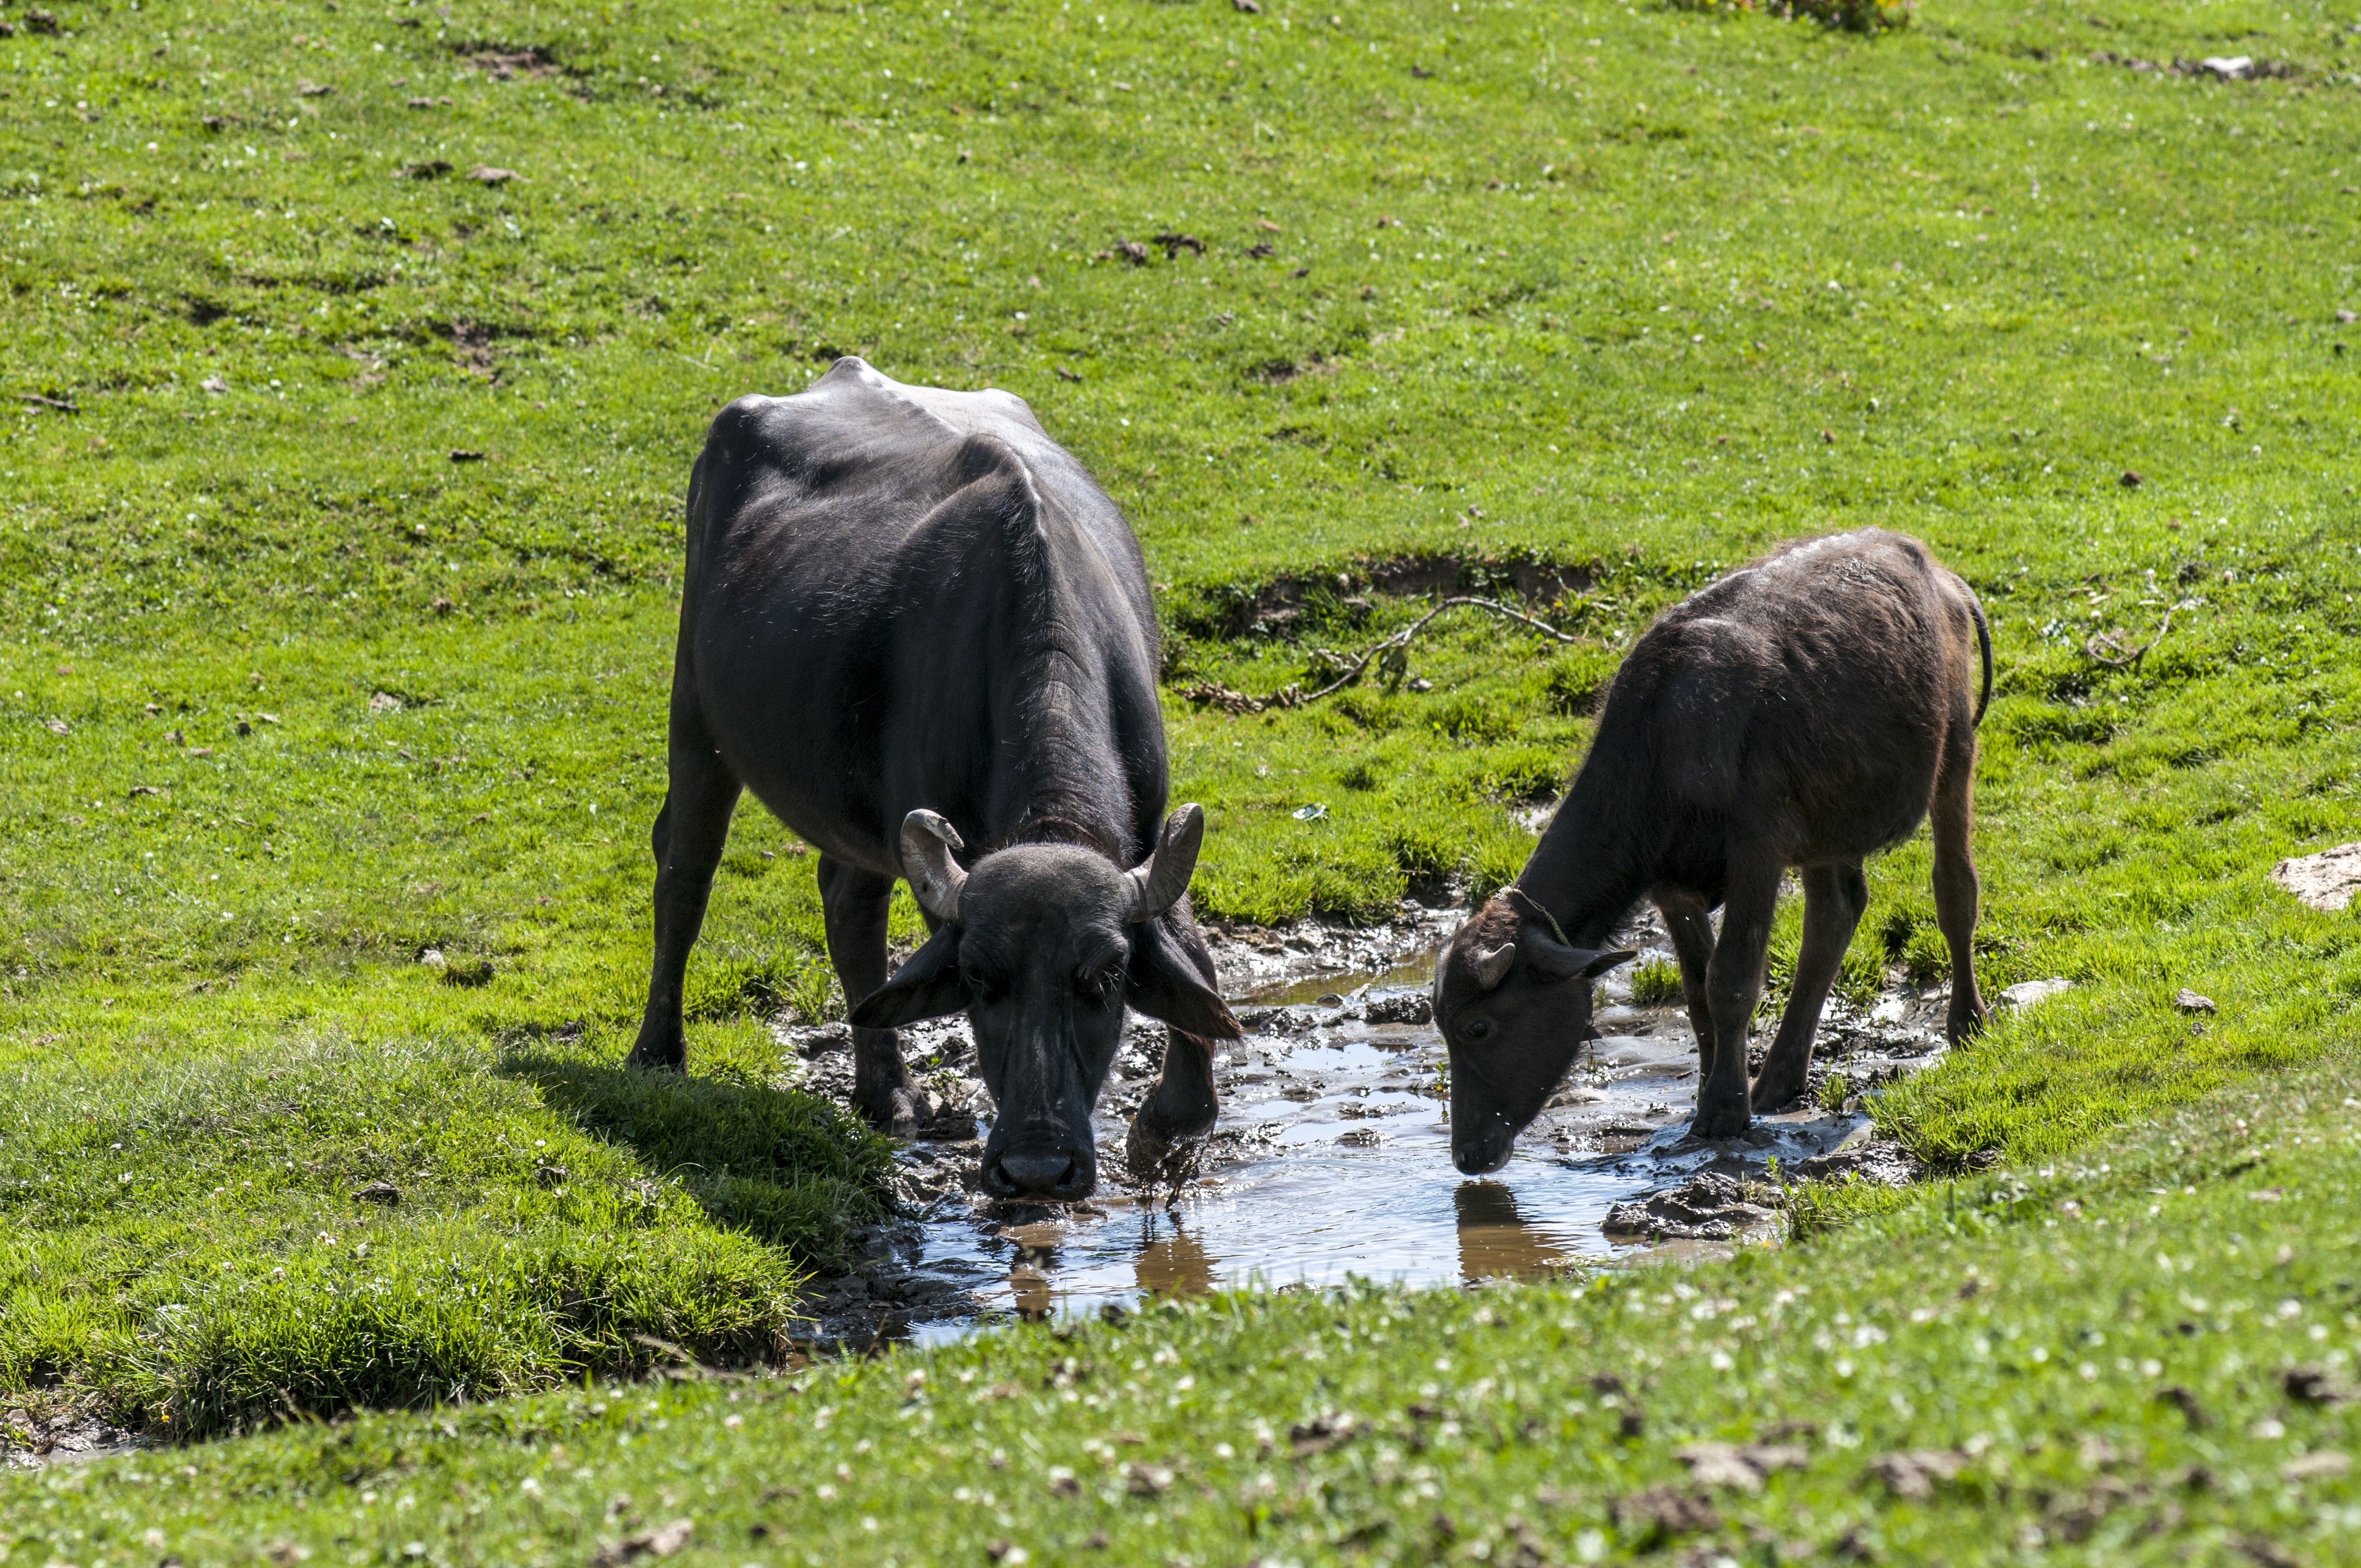 The buffaloes drinking water